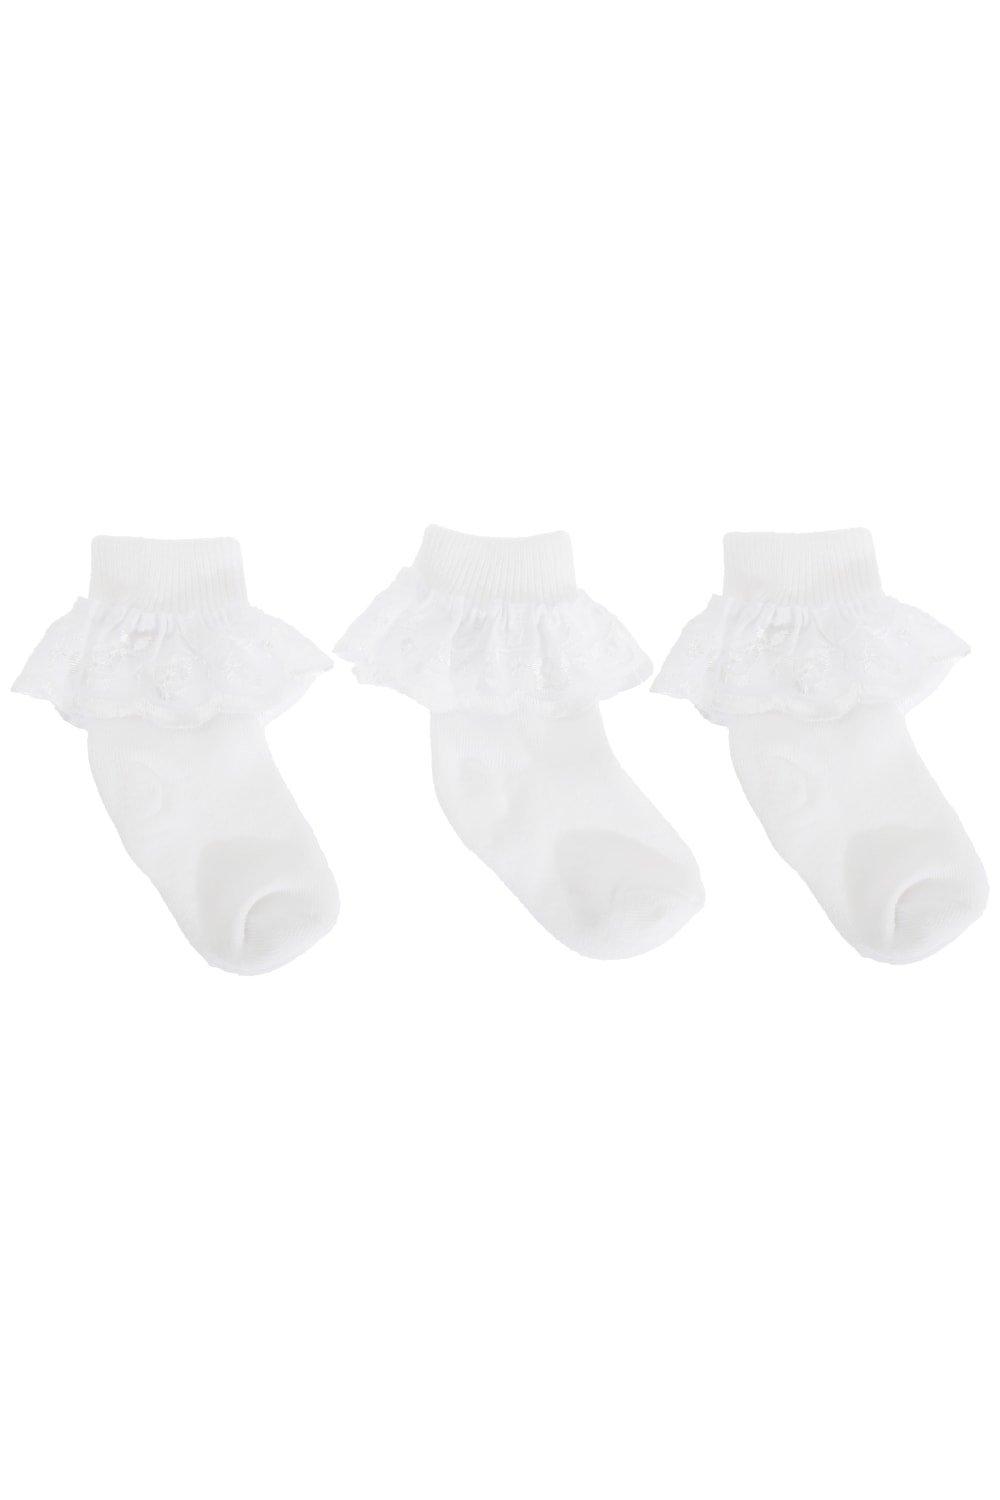 / Cotton Rich Lace Frilly Top Socks With Floral Design (Pack Of 3)